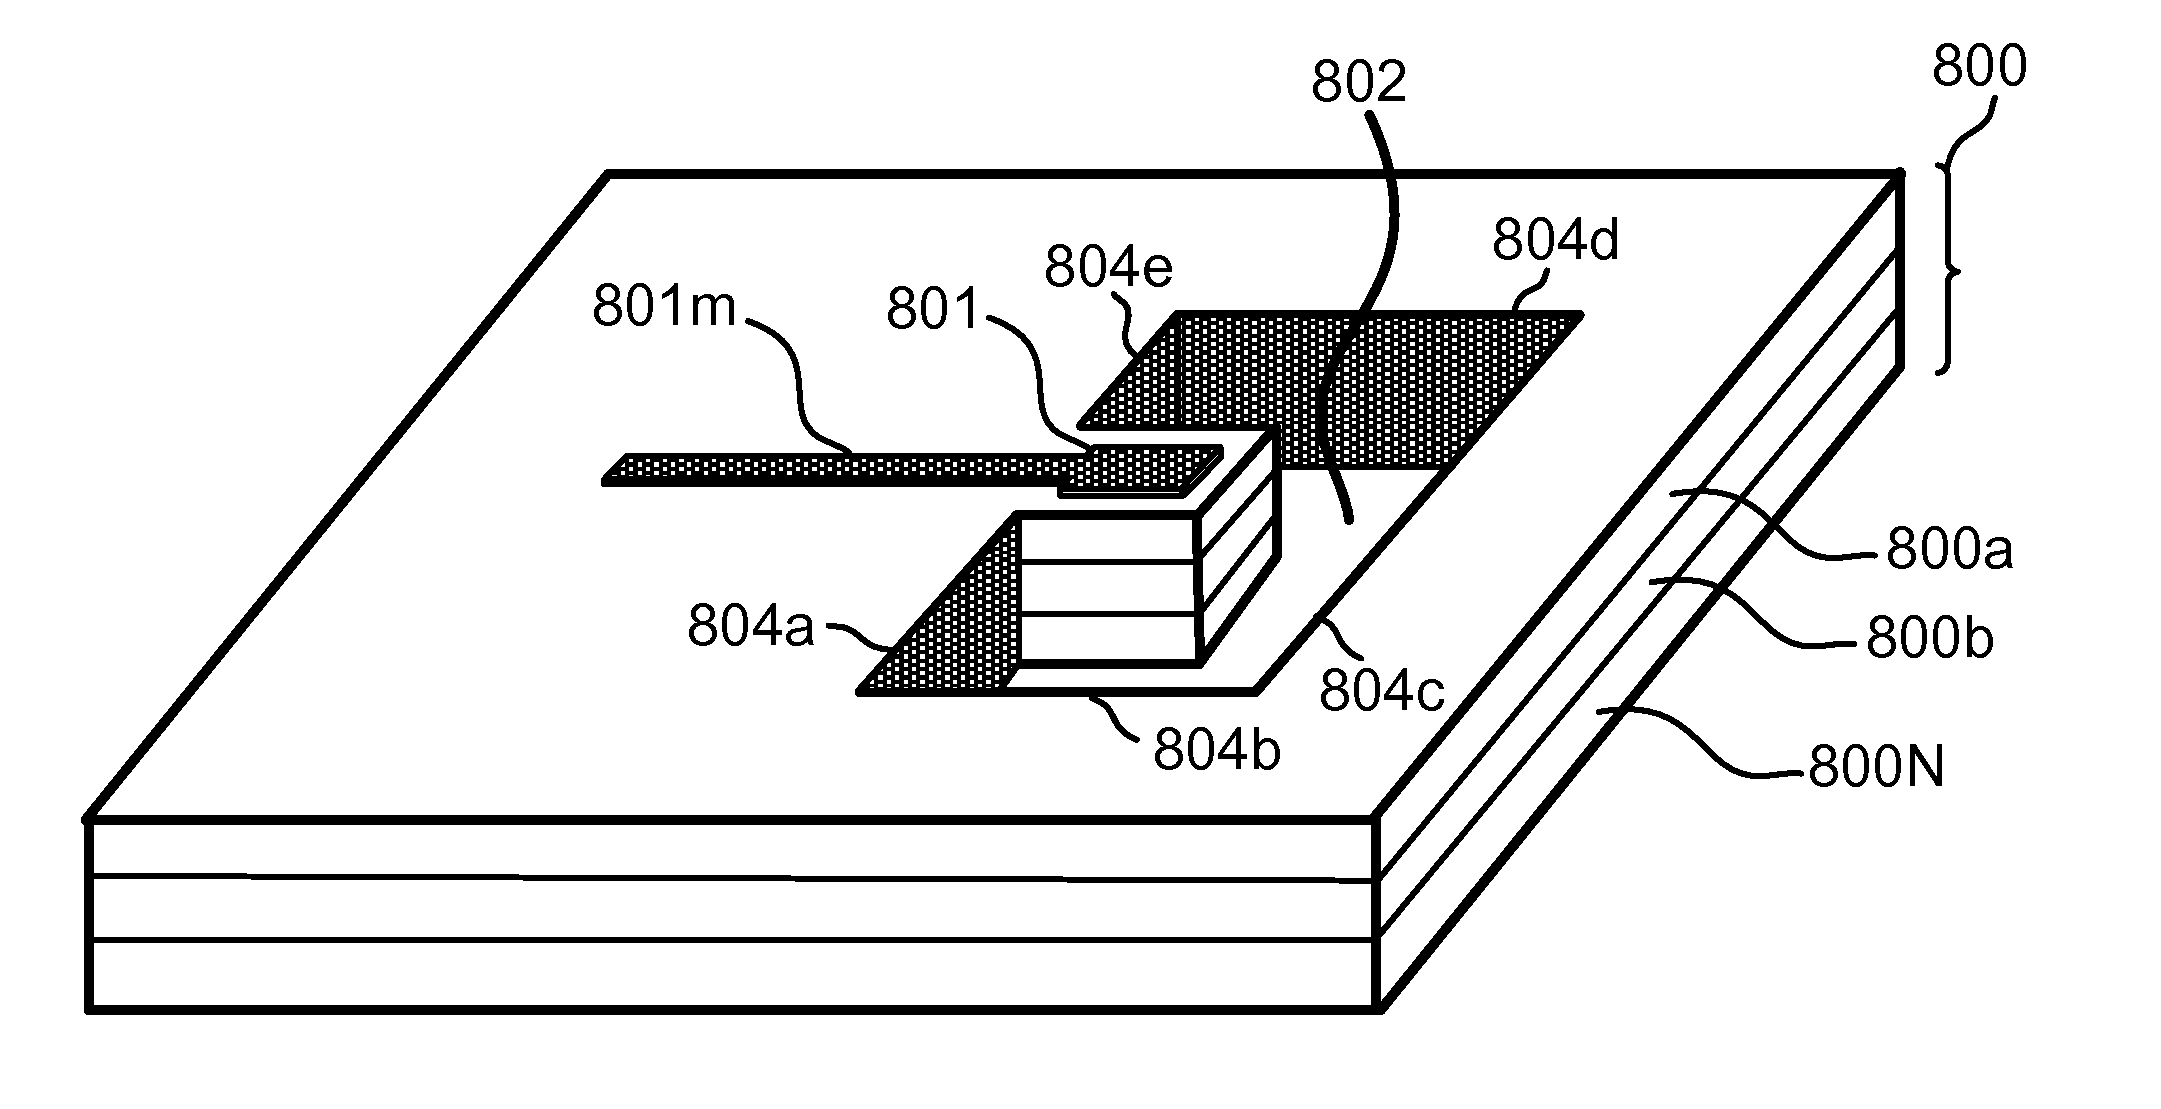 Laminate structures having a hole surrounding a probe for propagating millimeter waves